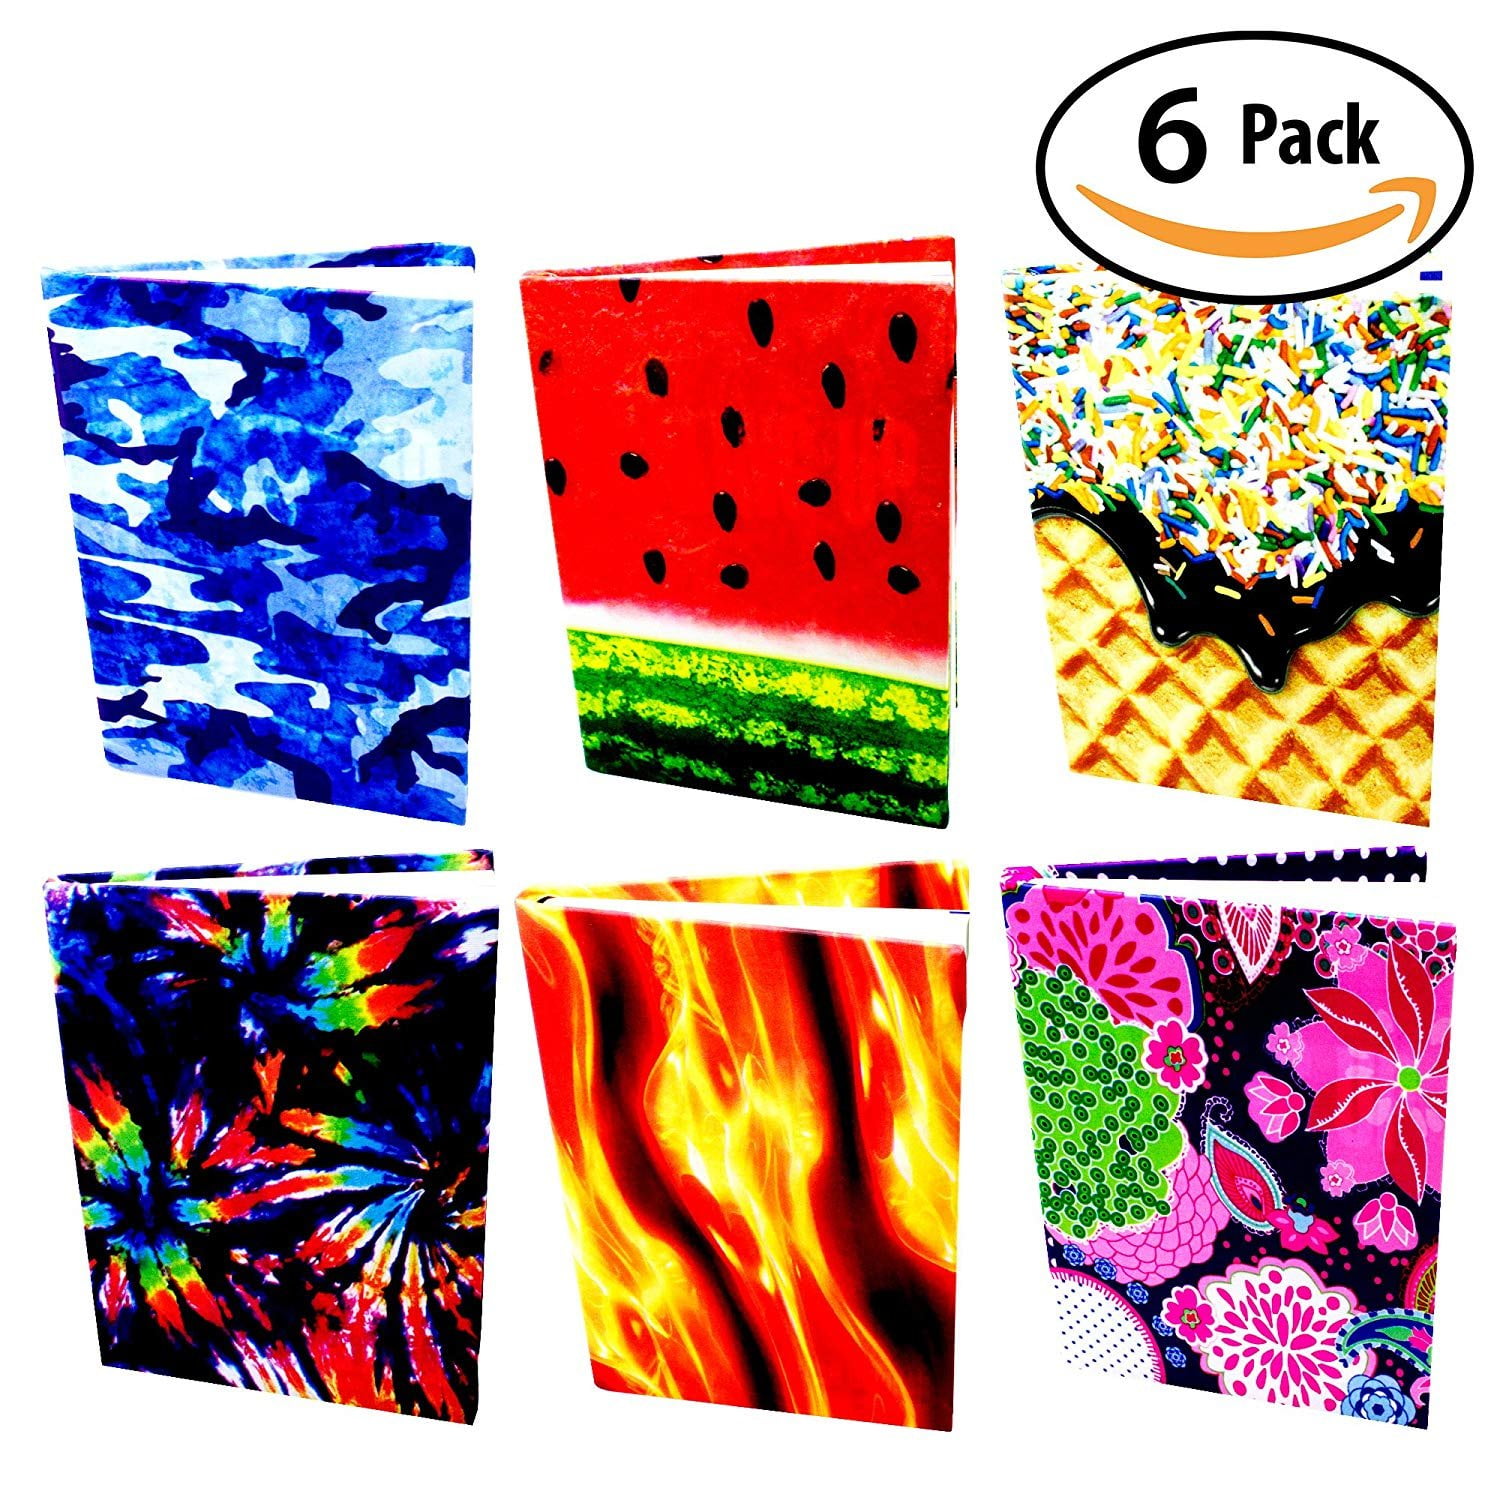 Fits Most Hardcover Textbooks up to 9 x 11 Book Sox Stretchable Book Cover: Jumbo 6 Print Value Pack Adhesive-Free Nylon Fabric School Book Protector Easy to Put On Jacket wash Re-use Ultra Print 